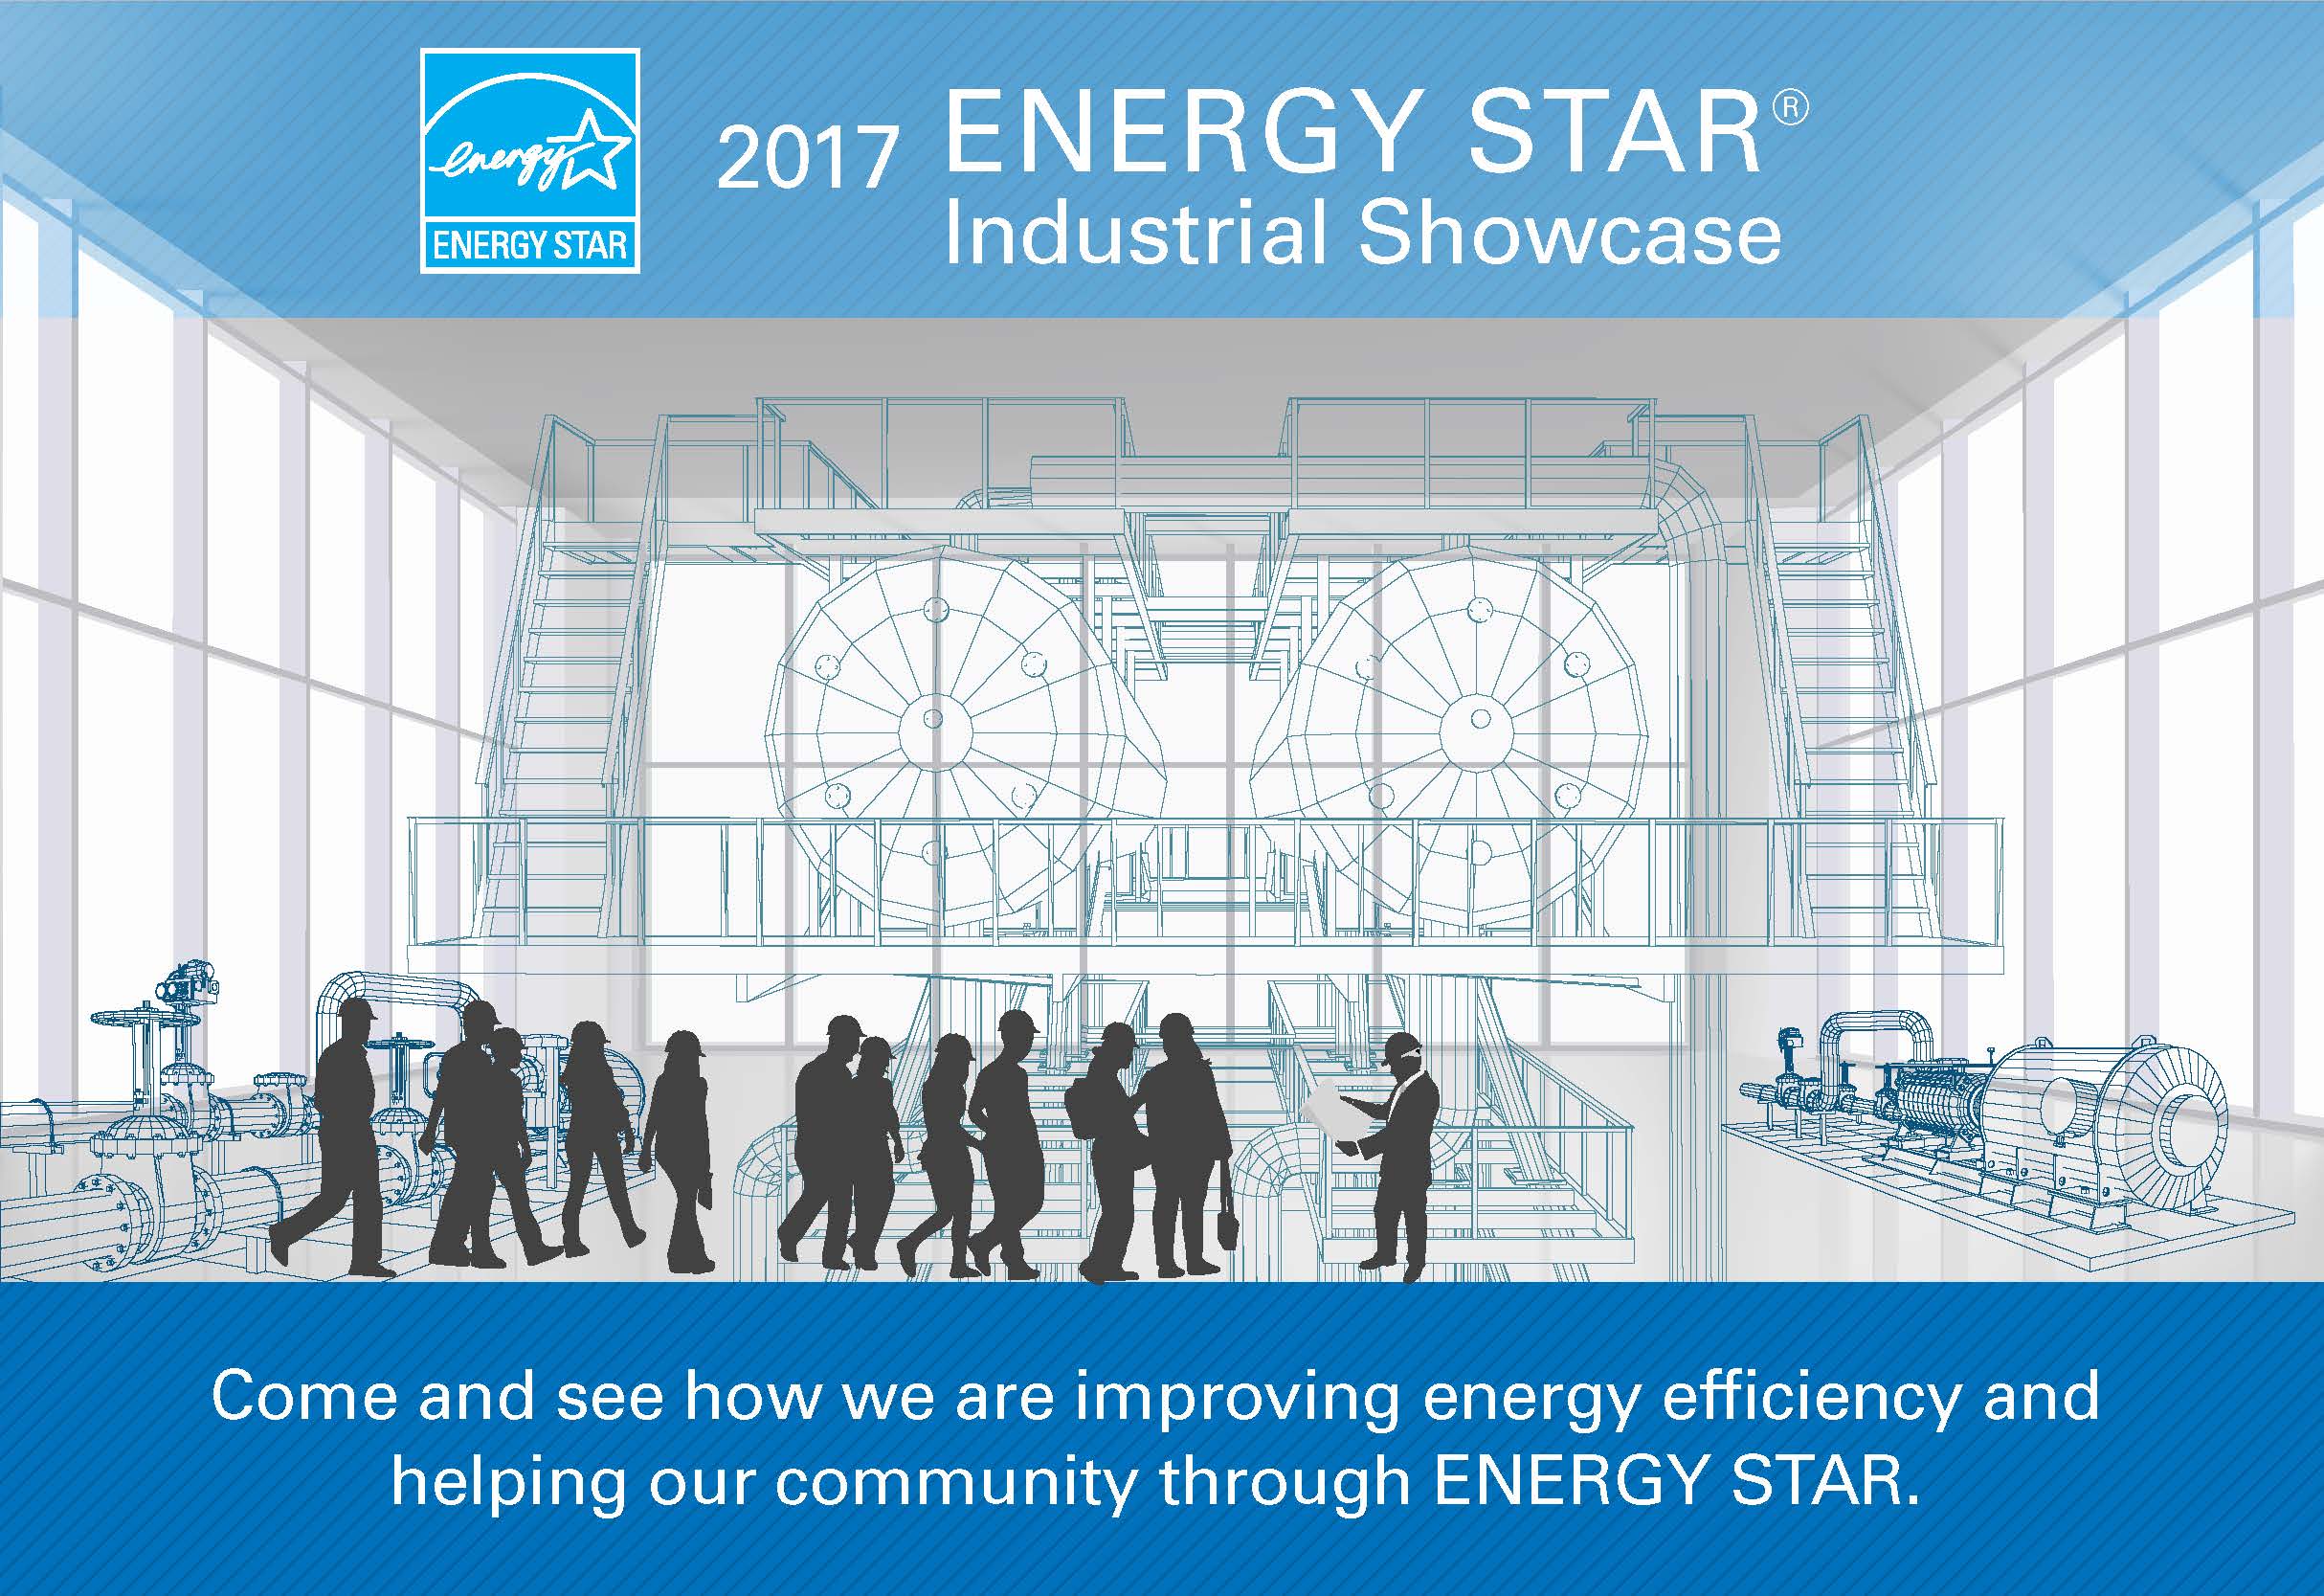 ENERGY STAR Industry Showcase with tagline